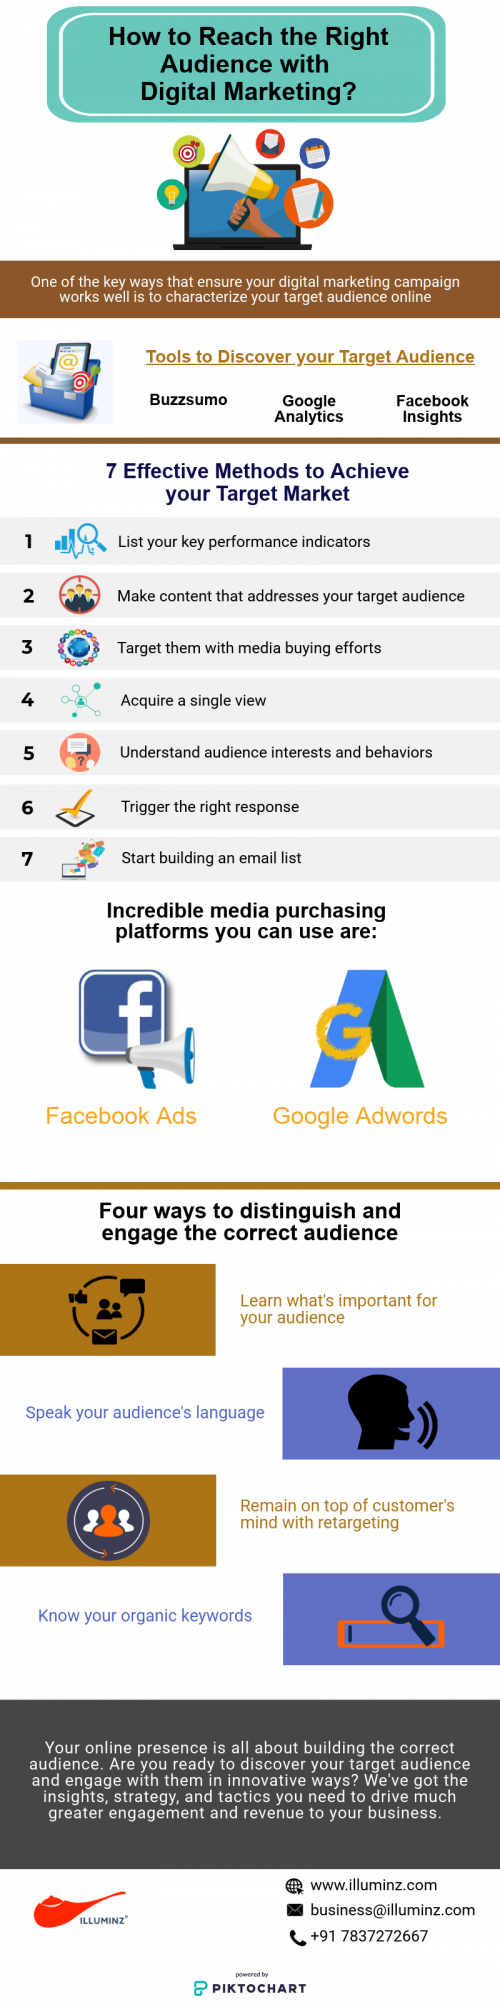 Attracting the right audience is significant to effectively execute digital marketing campaigns. And reaching the target audience is not so difficult. With the help of online marketing strategies, you can easily reach out to the right audience for your organization. Check out this infographic which will help you to reach the target audience or communicate with your customer base - https://bit.ly/2IcUGUD